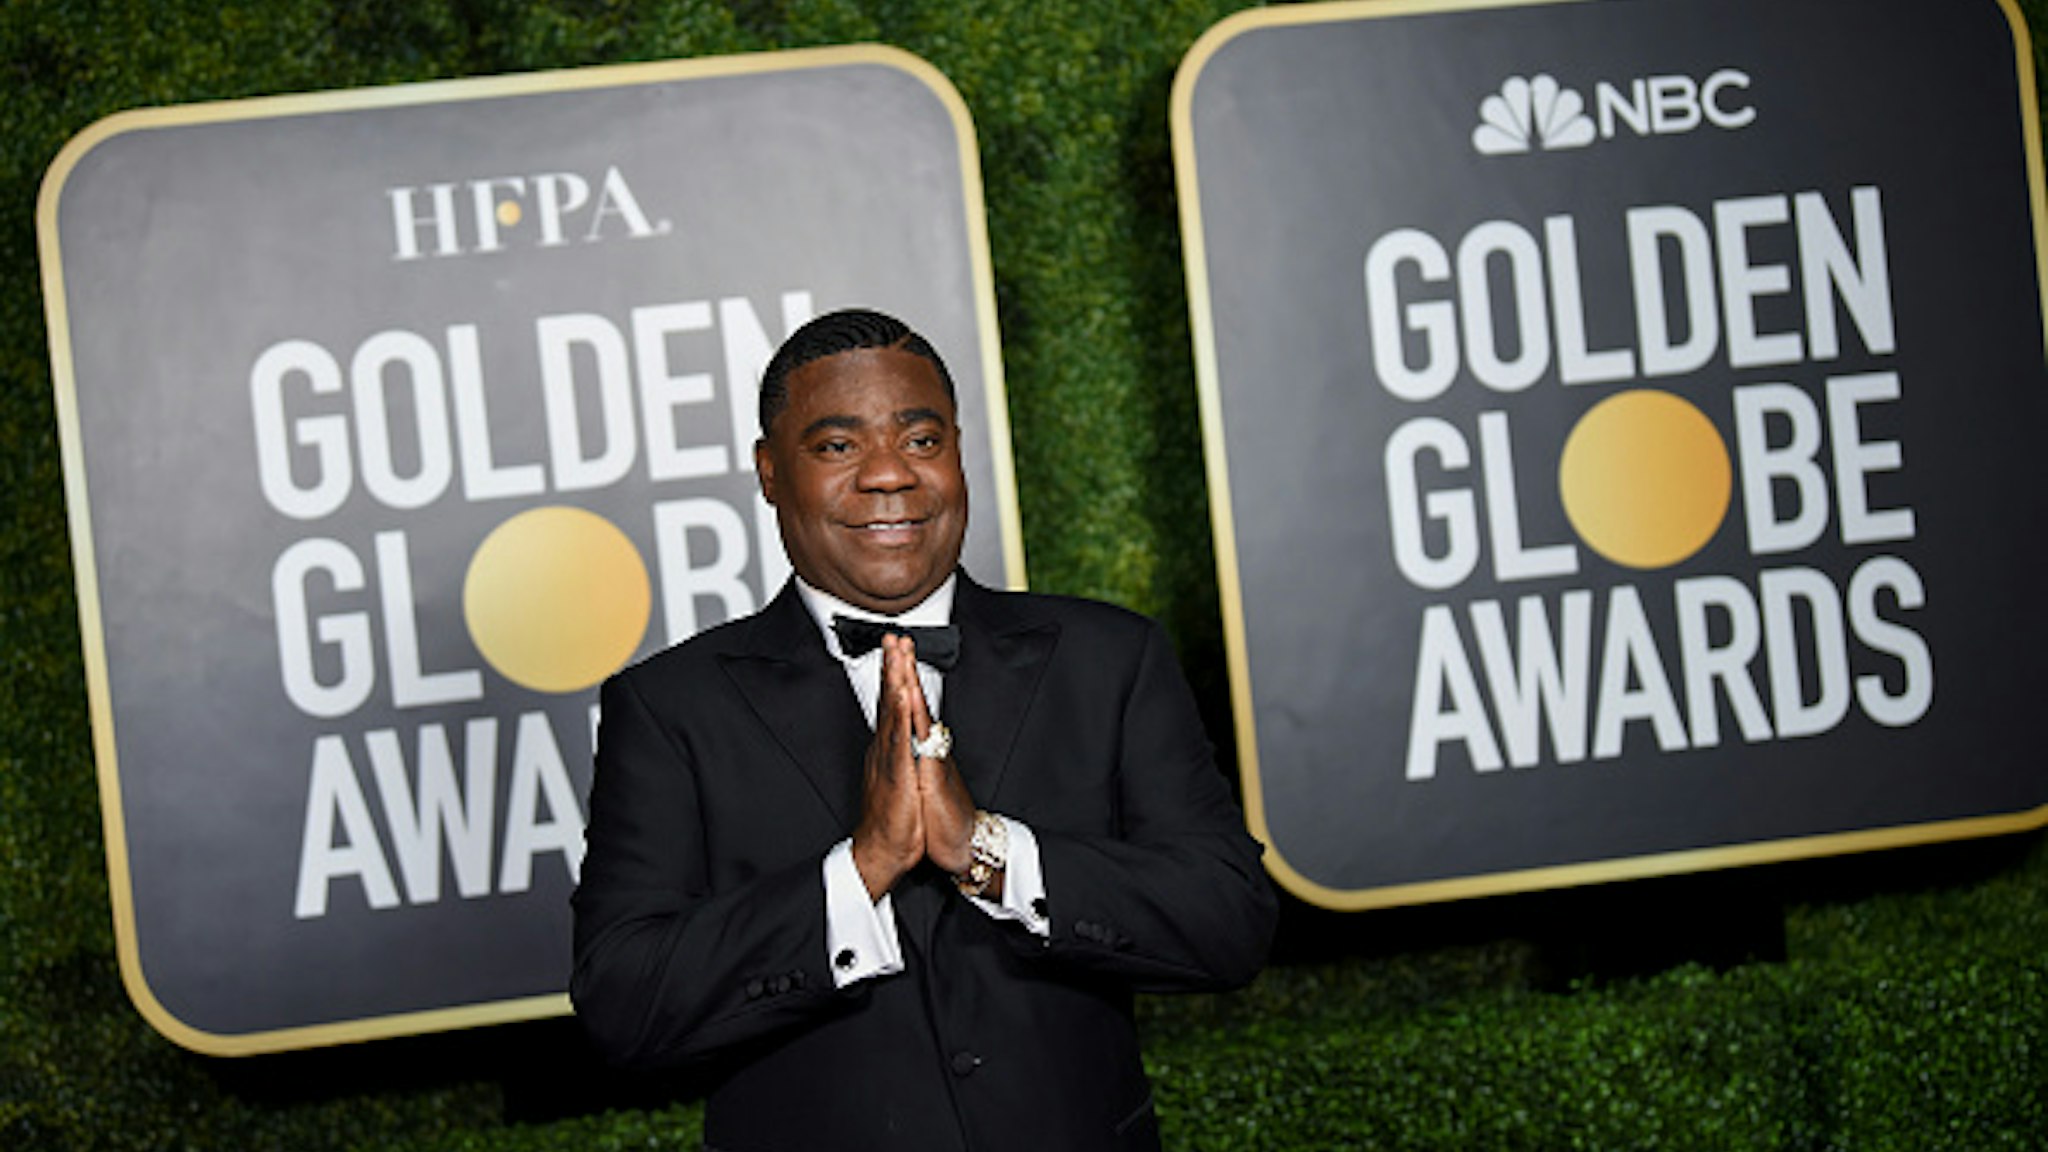 NEW YORK, NEW YORK - FEBRUARY 28: Tracy Morgan attends the 78th Annual Golden Globe® Awards at The Rainbow Room on February 28, 2021 in New York City.